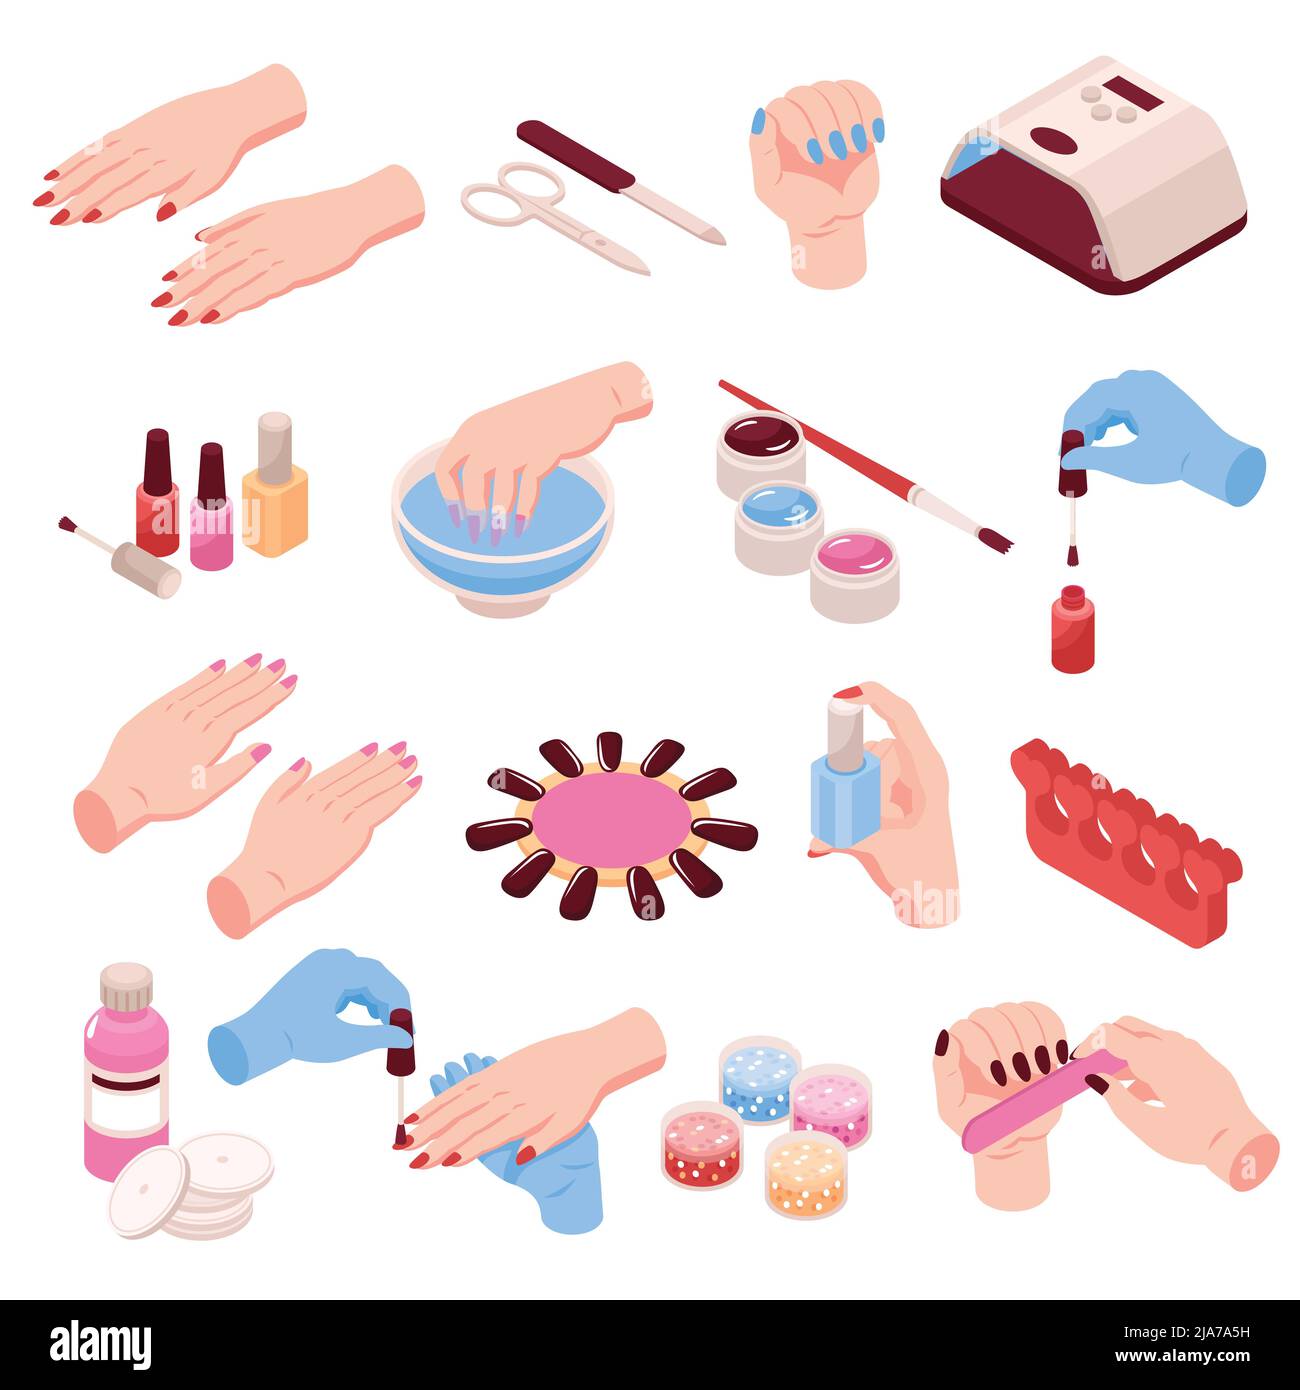 Manicure isometric set of female hands and various manicure accessories including scissors nail file tweezers nail polish isolated vector illustration Stock Vector